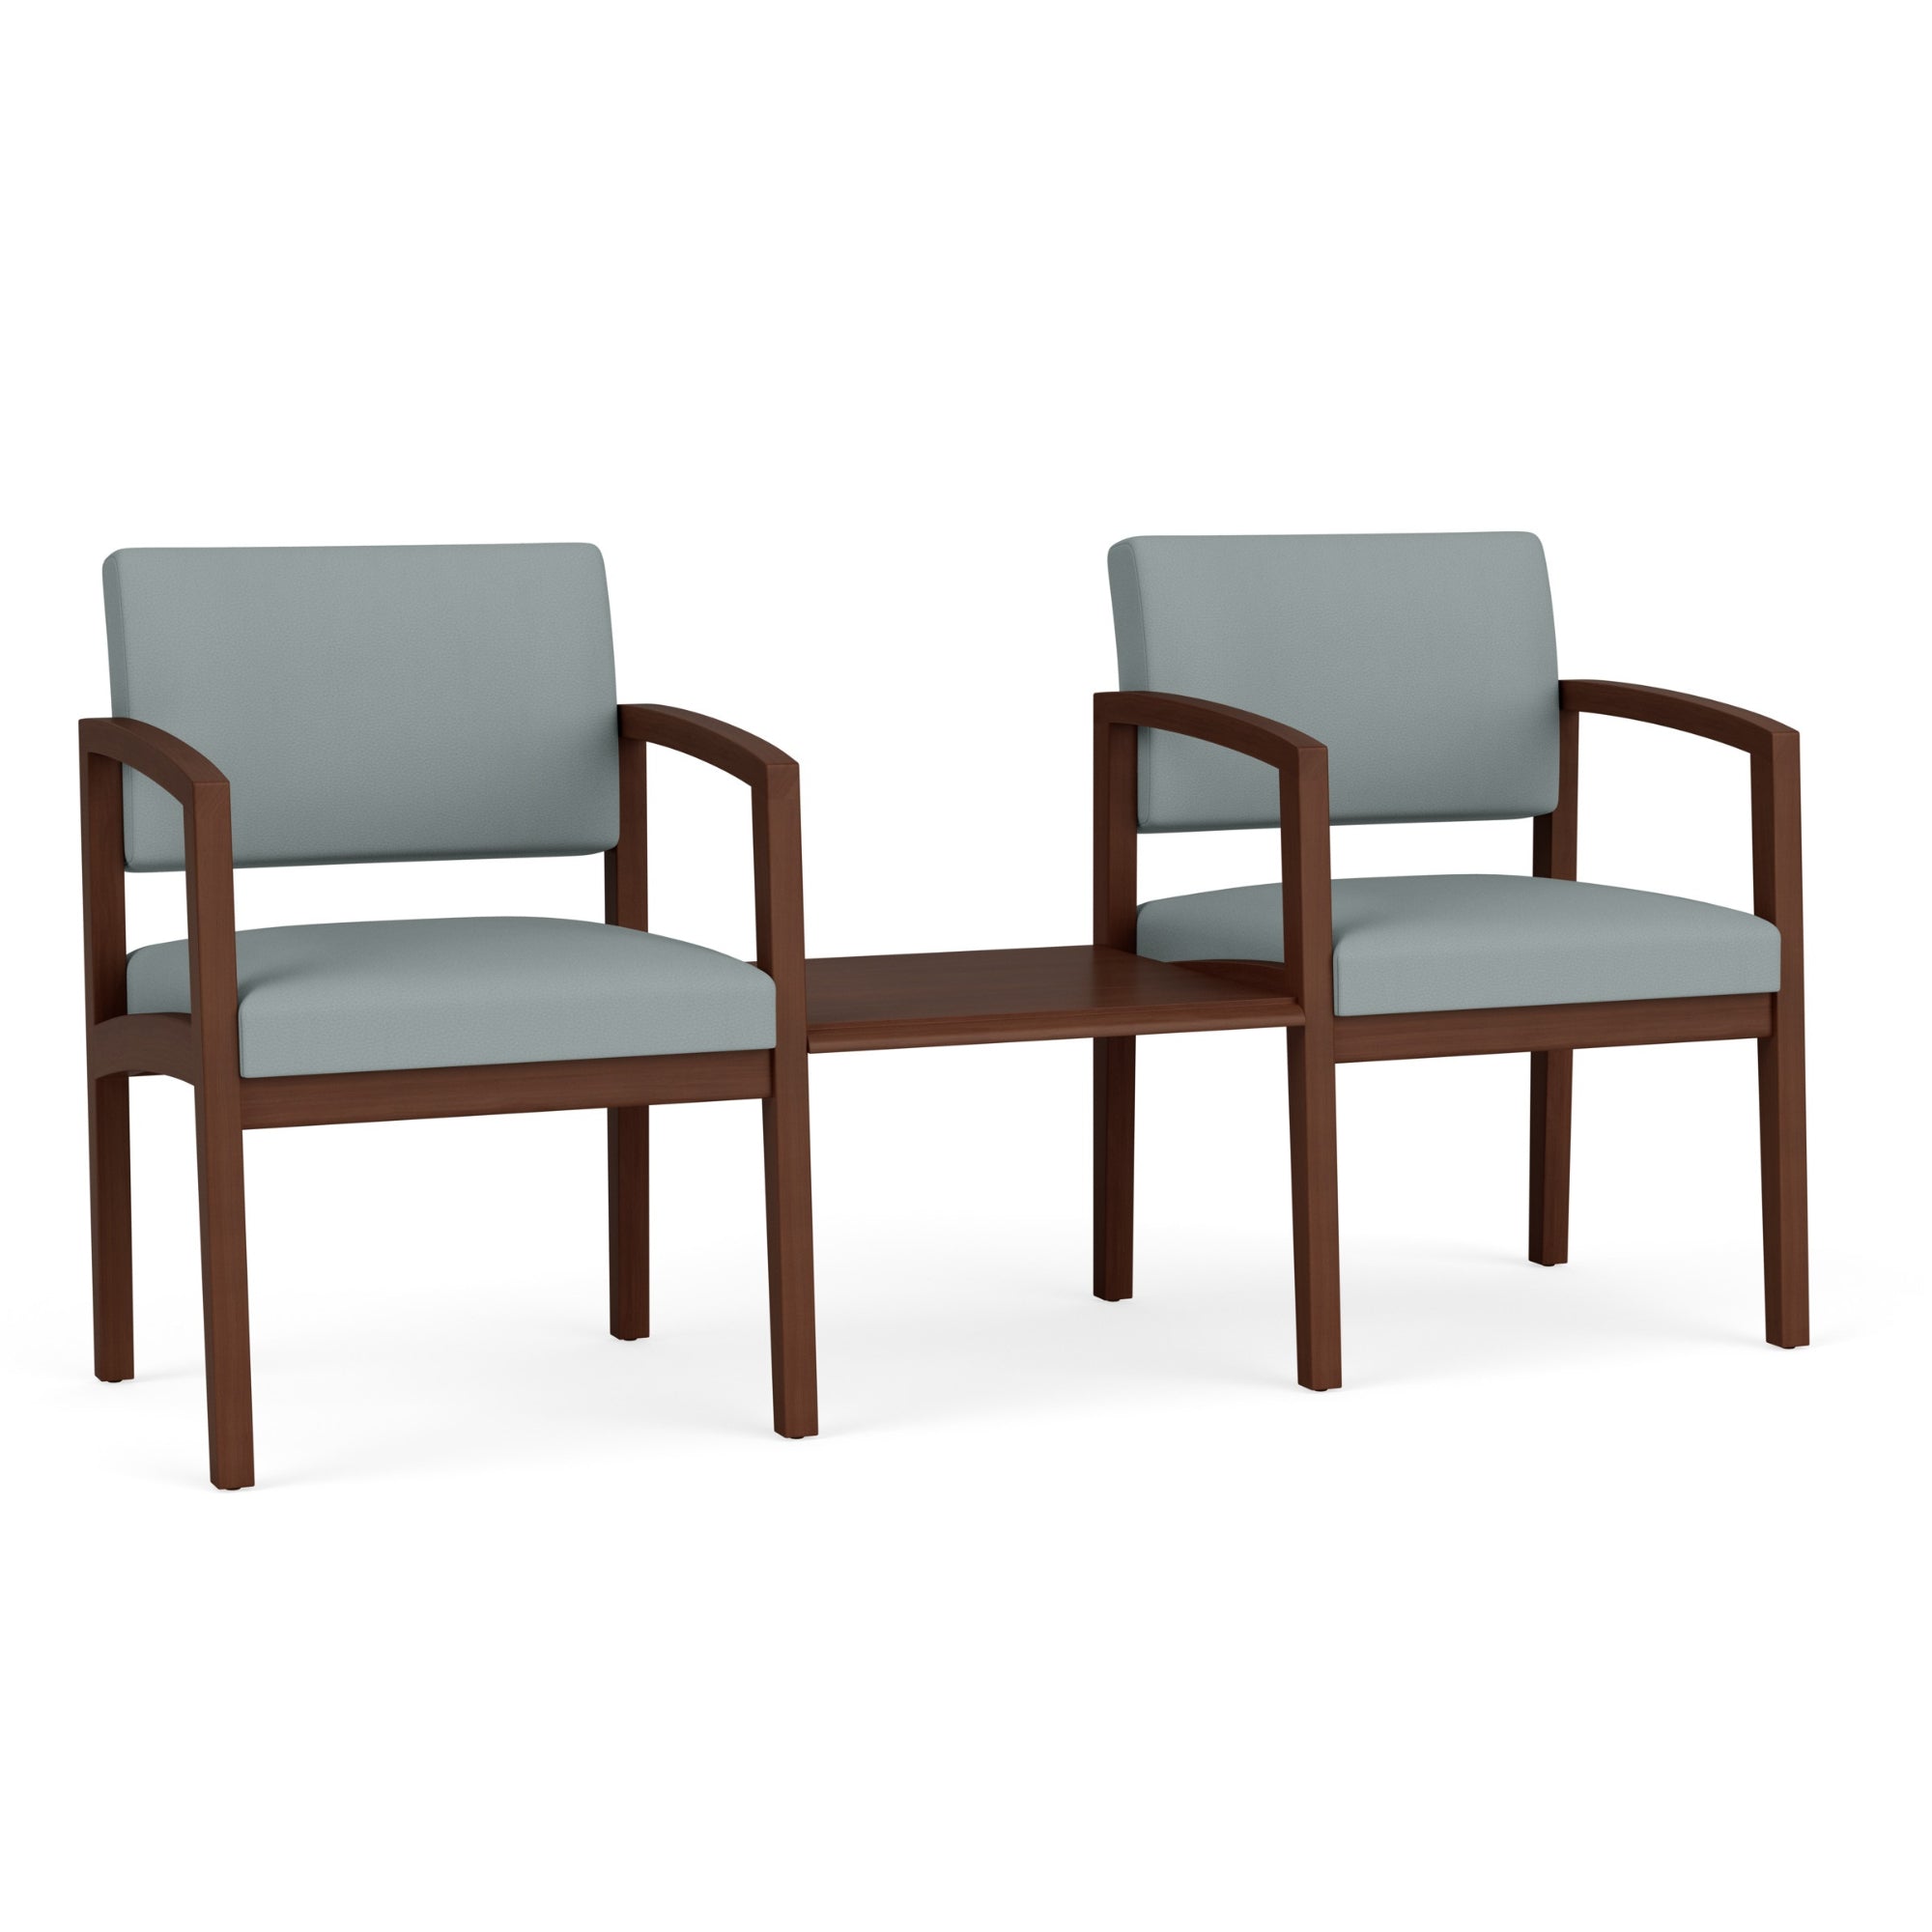 Lenox Wood Collection Reception Seating, 2 Chairs with Solid Wood Connecting Center Table, Standard Vinyl Upholstery, FREE SHIPPING